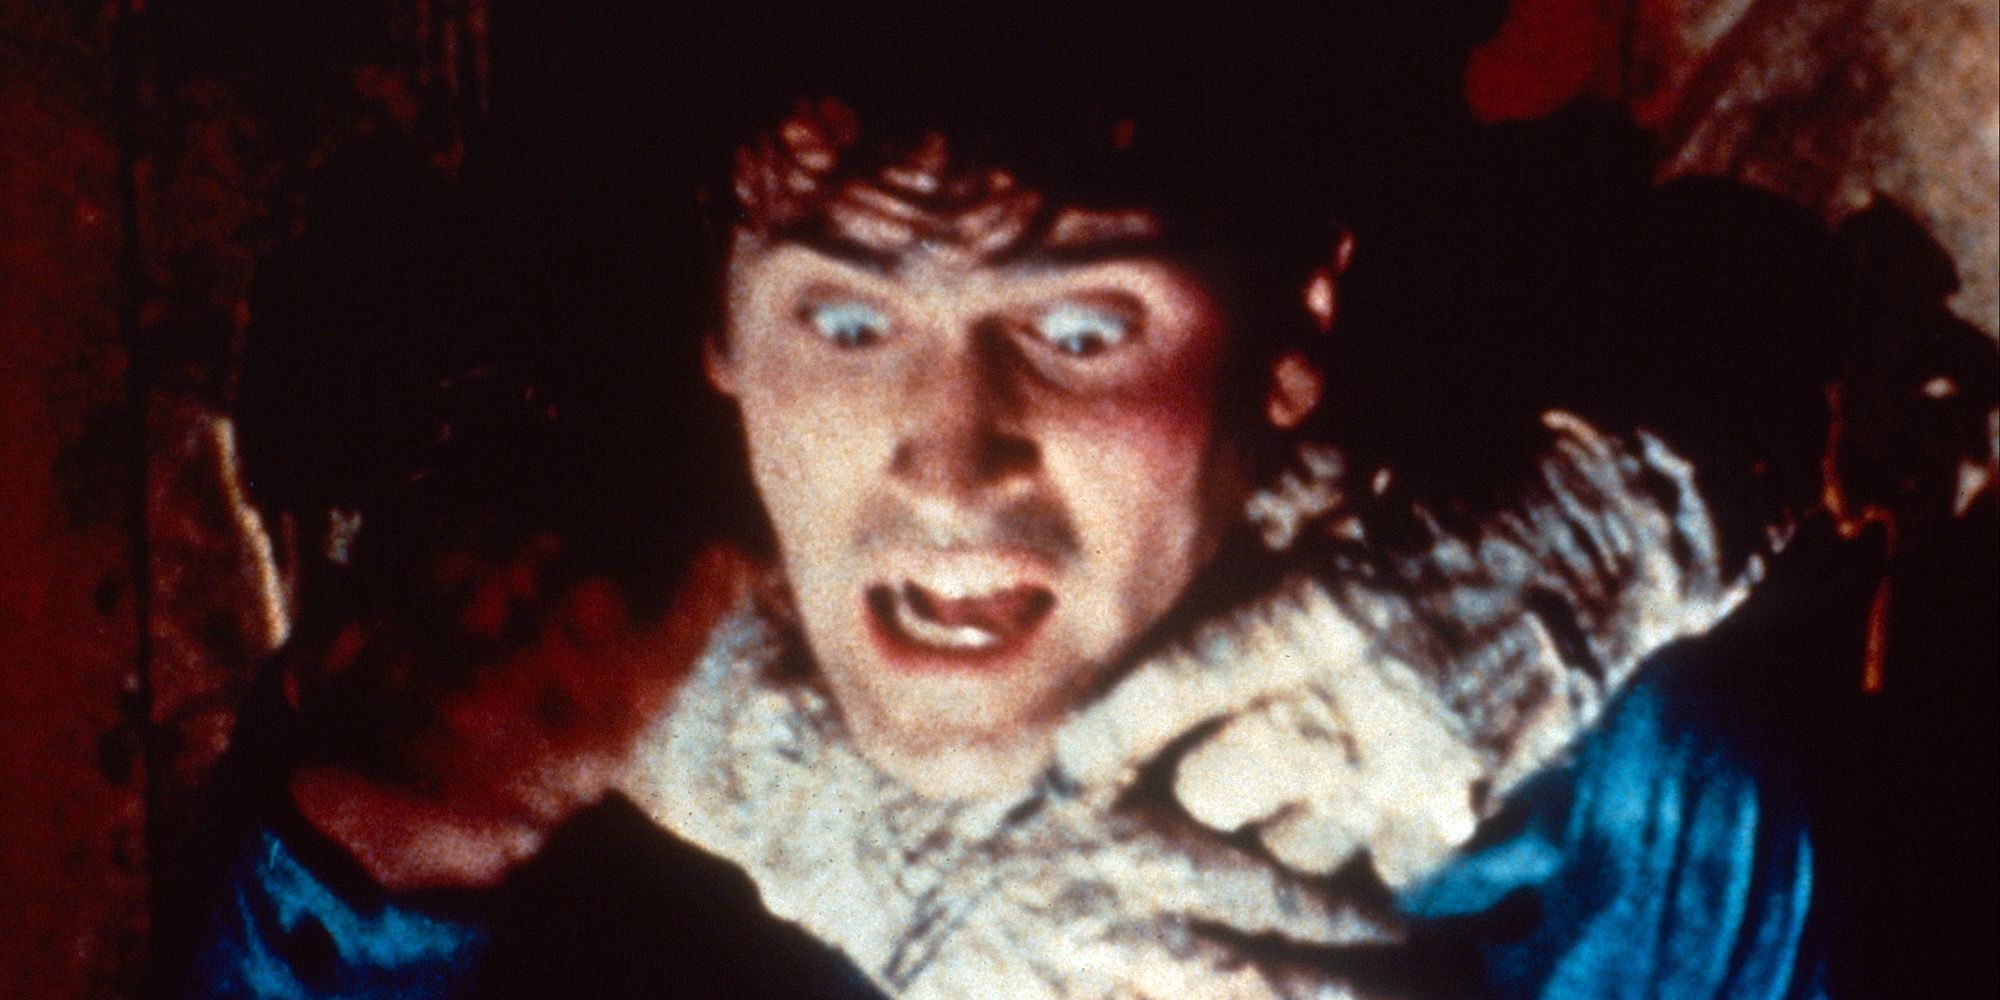 53 Best Classic Horror Movies of All Time from Psycho to The Exorcist